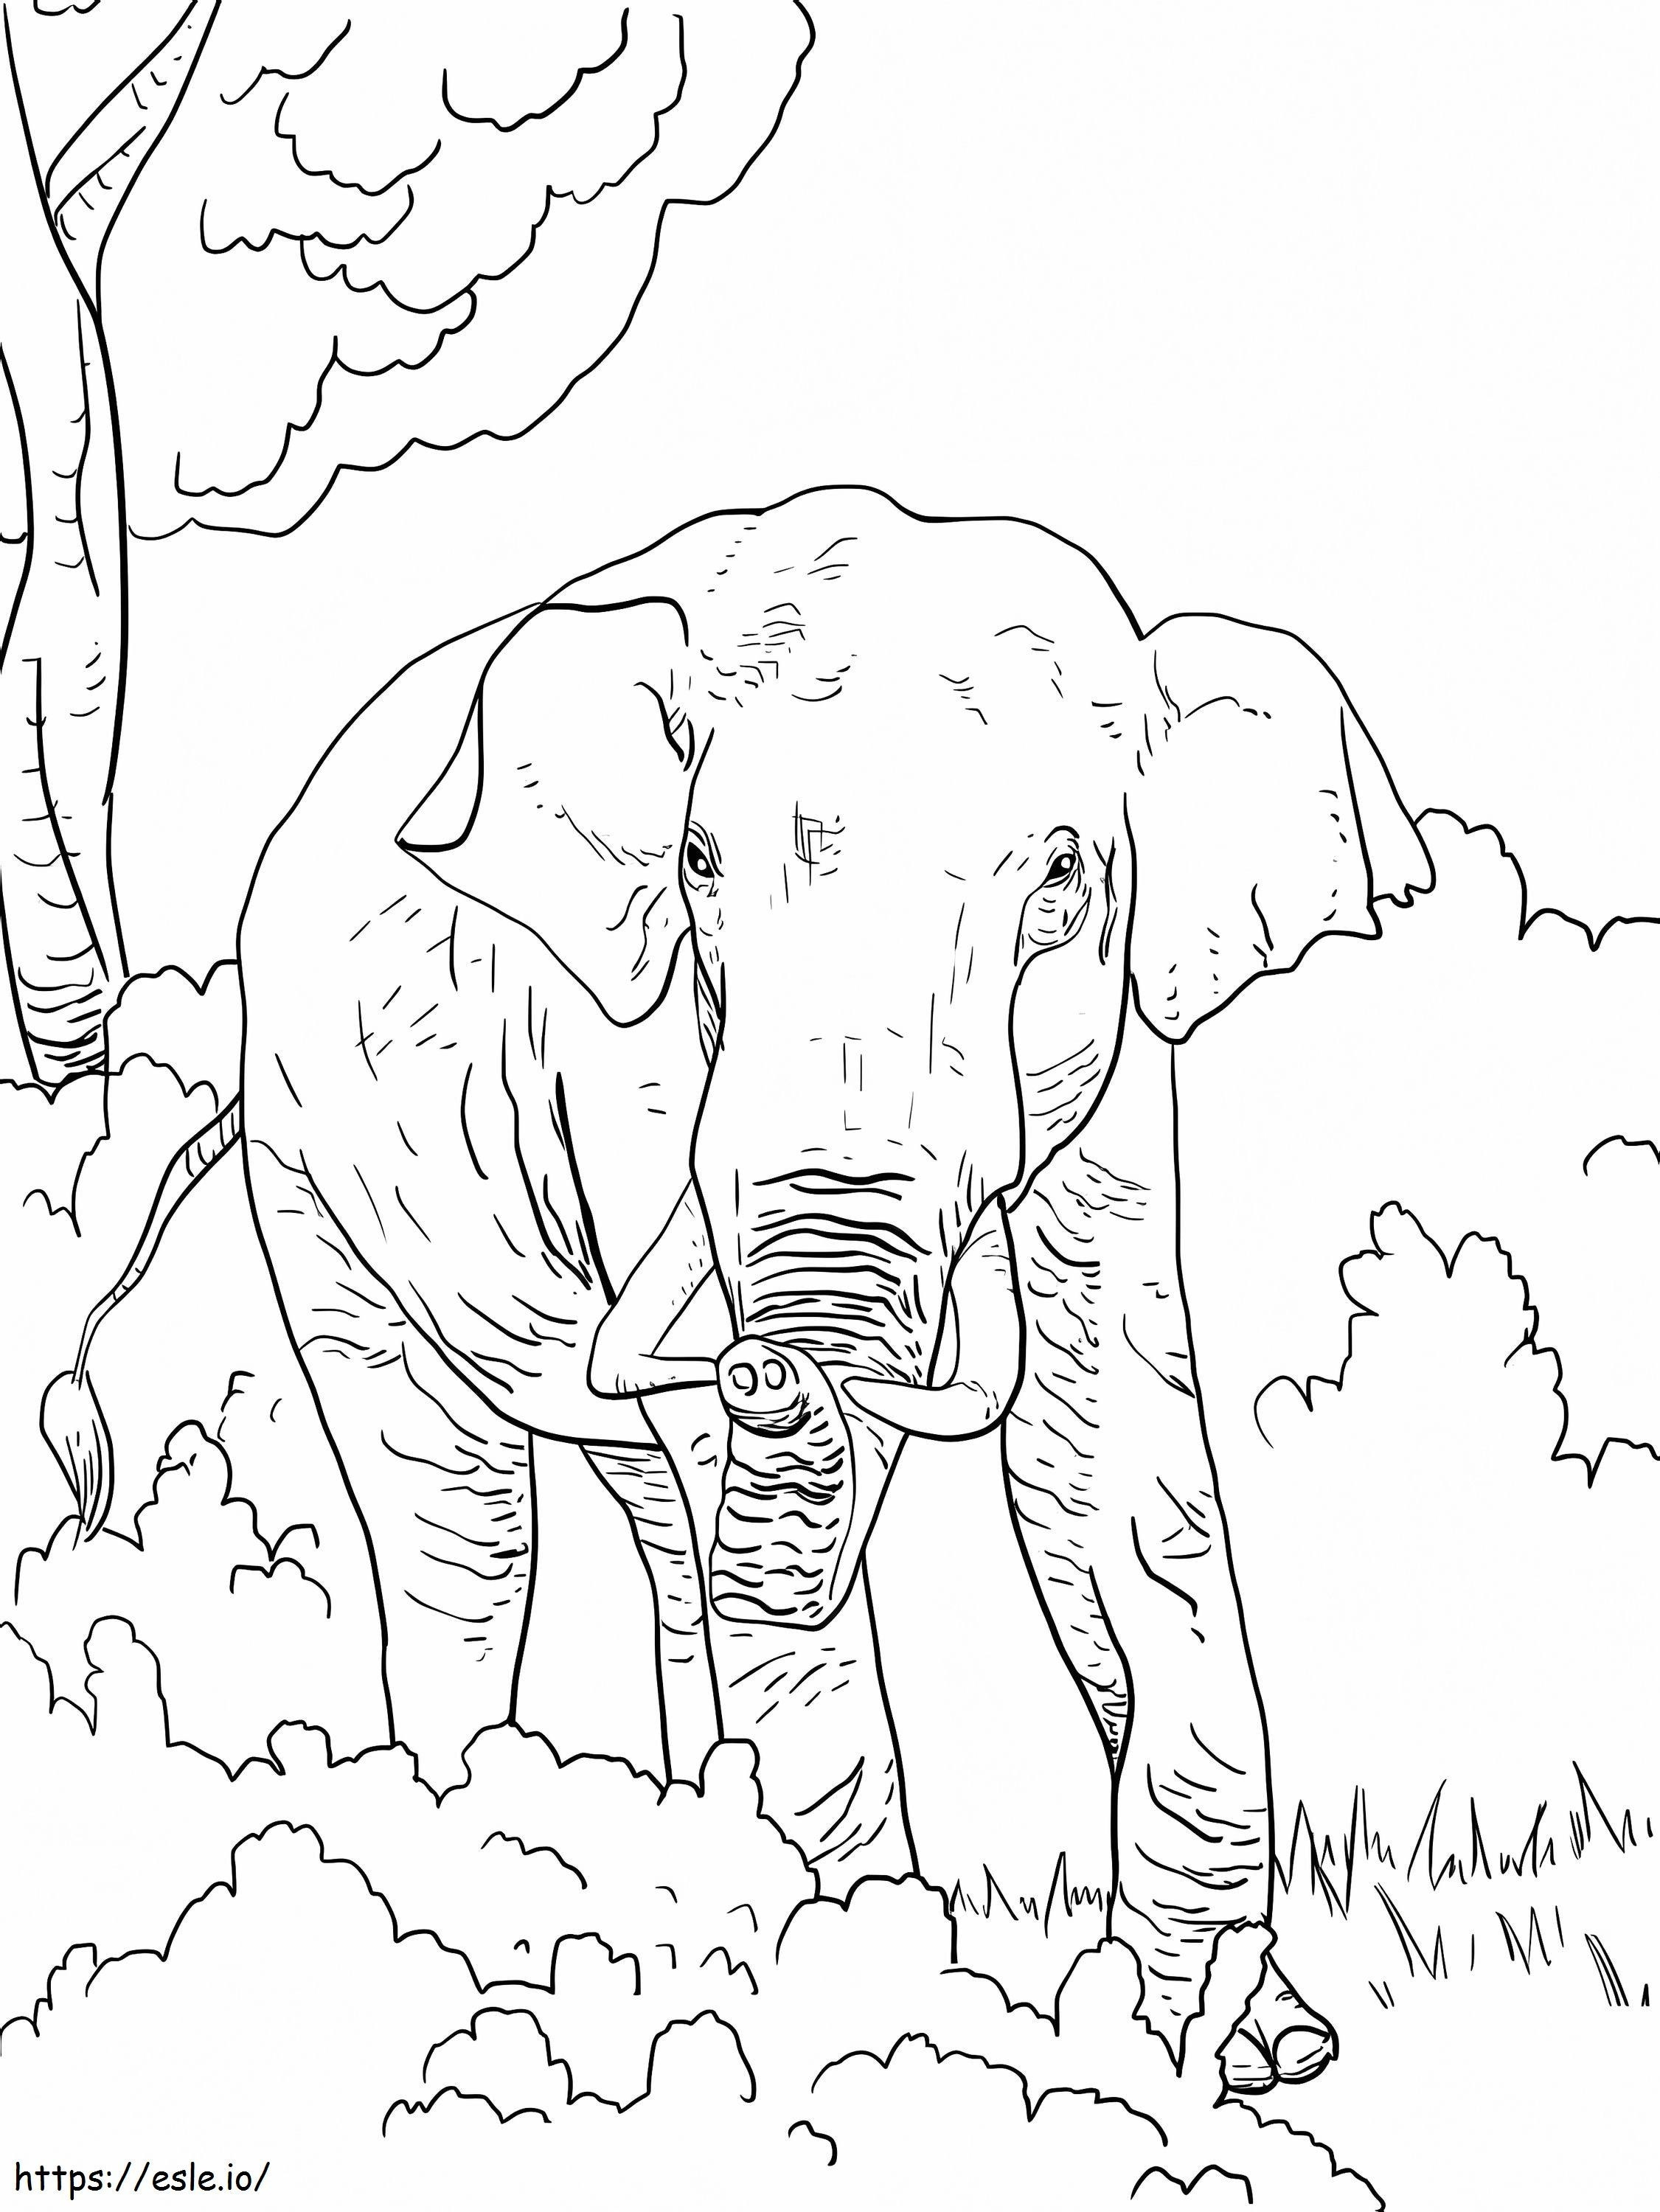 Indian Elephant 1 coloring page